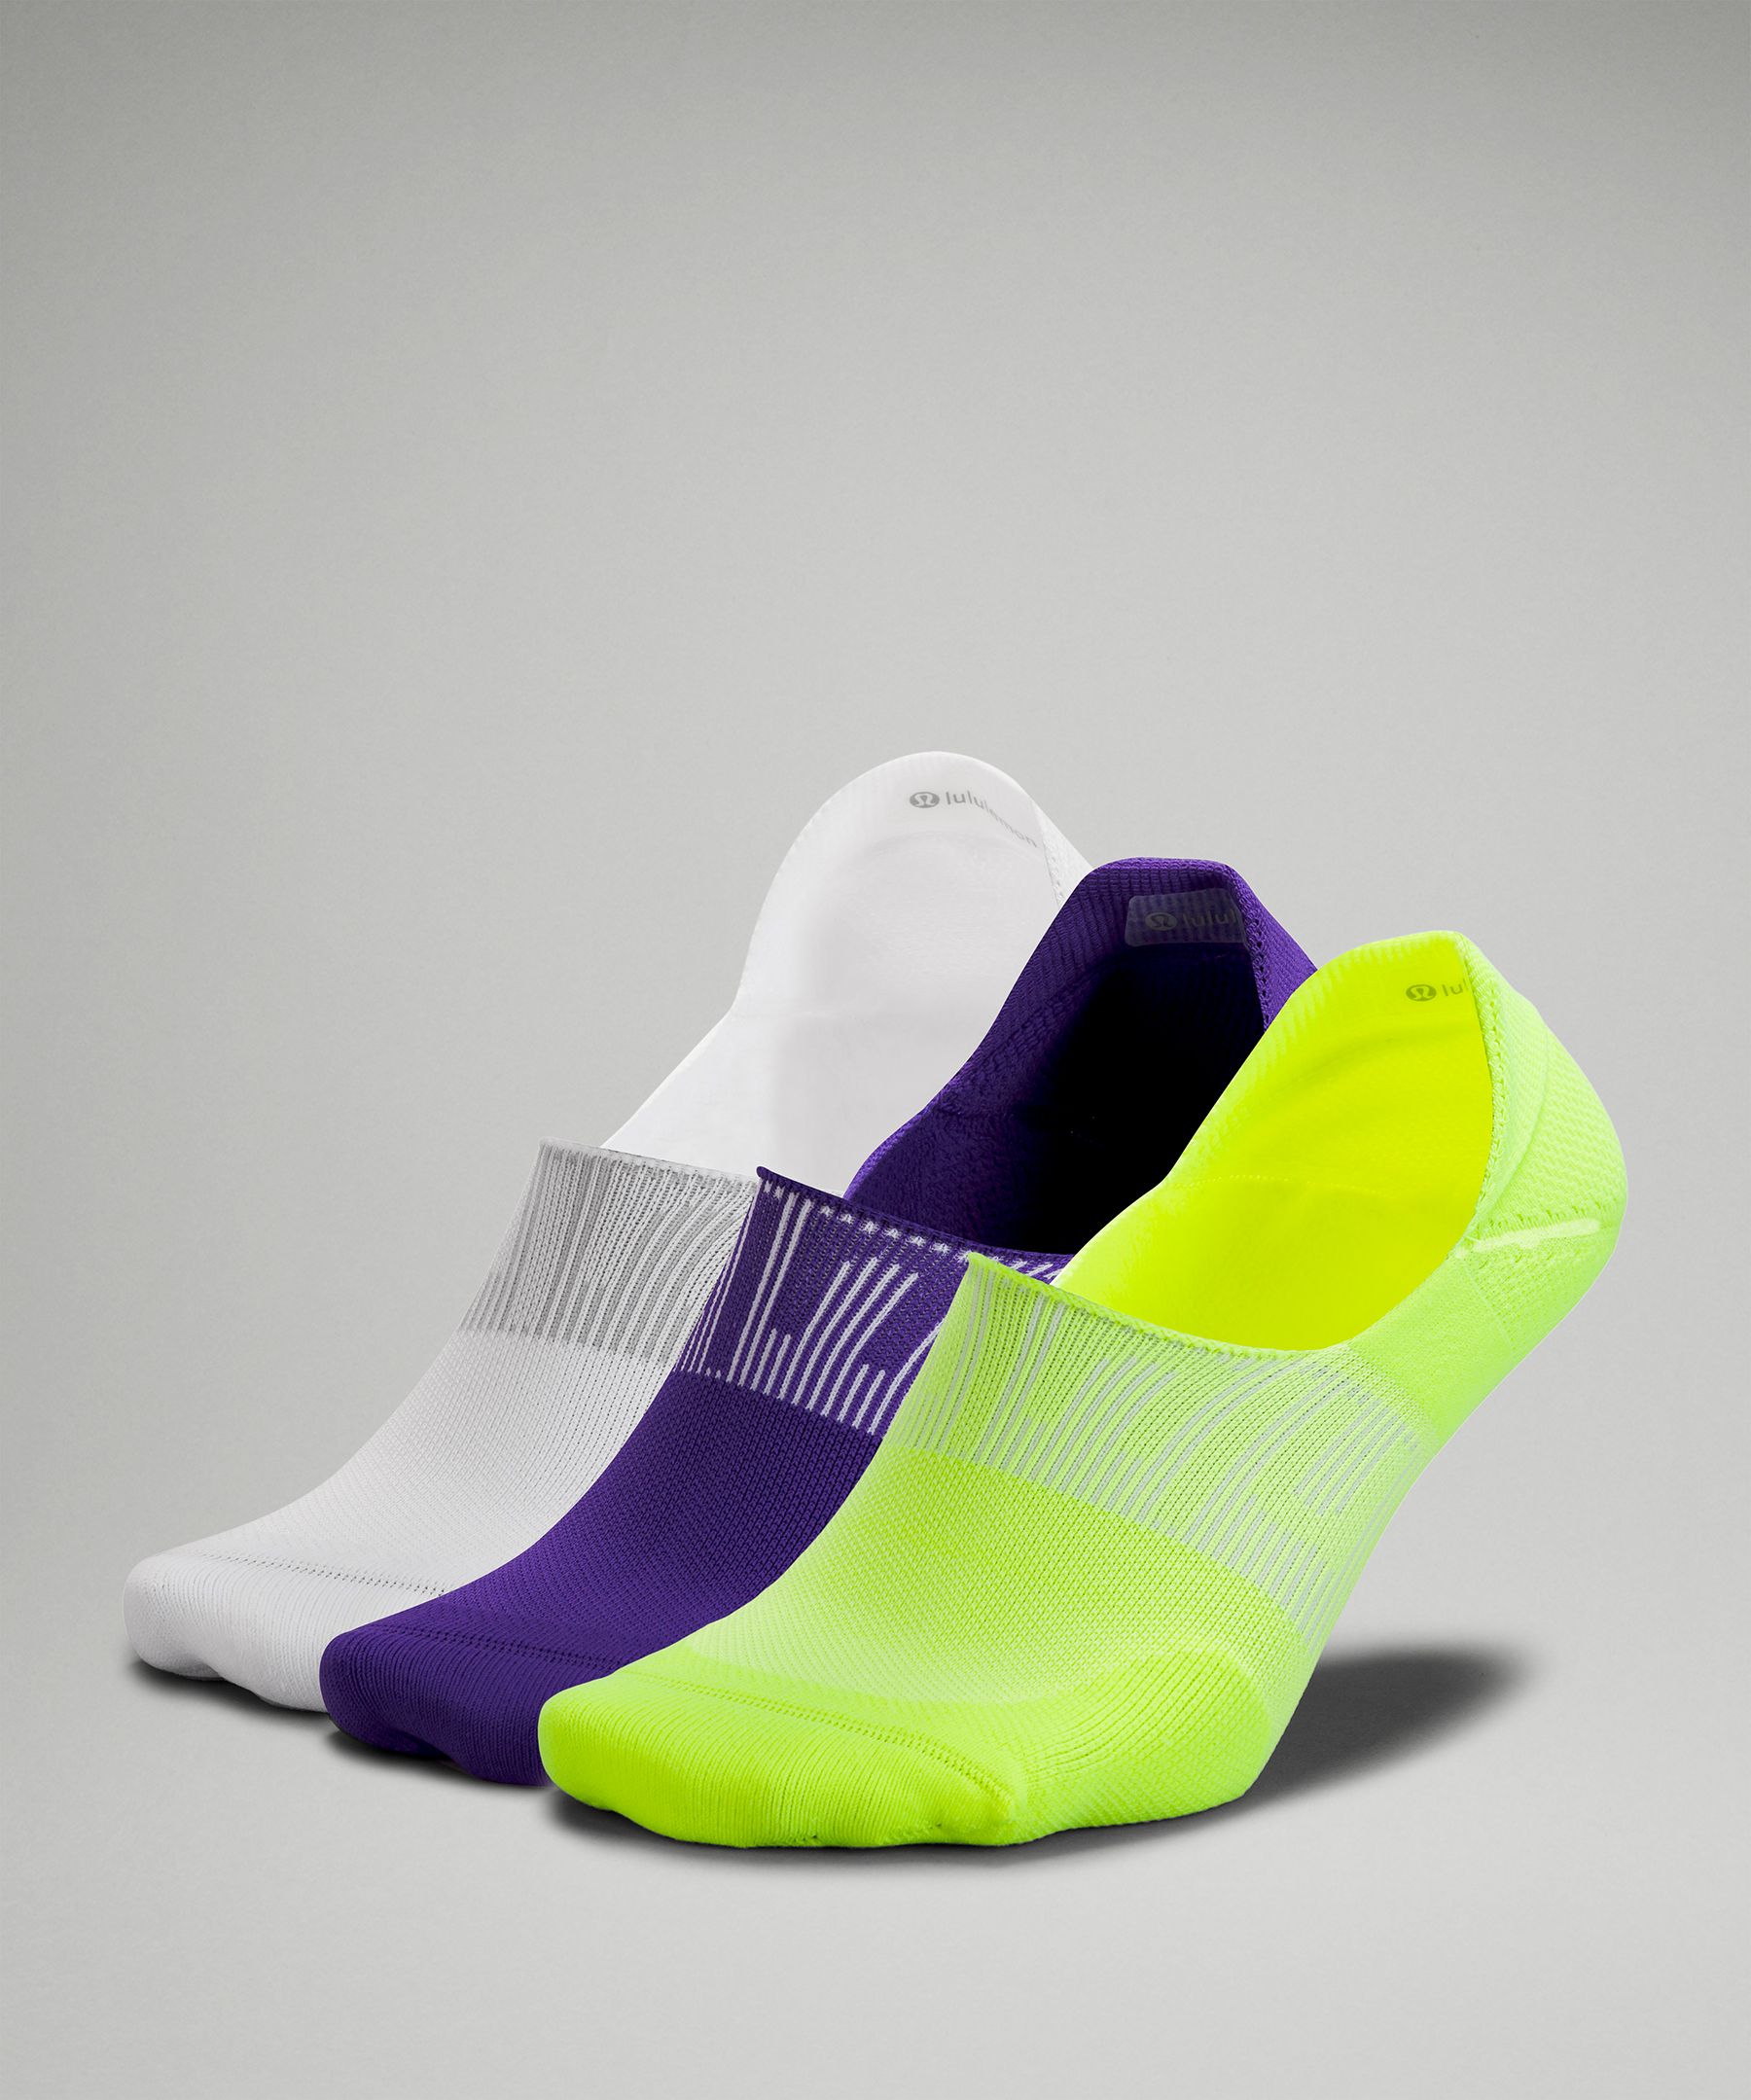 Lululemon Power Stride No-show Socks With Active Grip 3 Pack In Highlight Yellow/white/petrol Purple